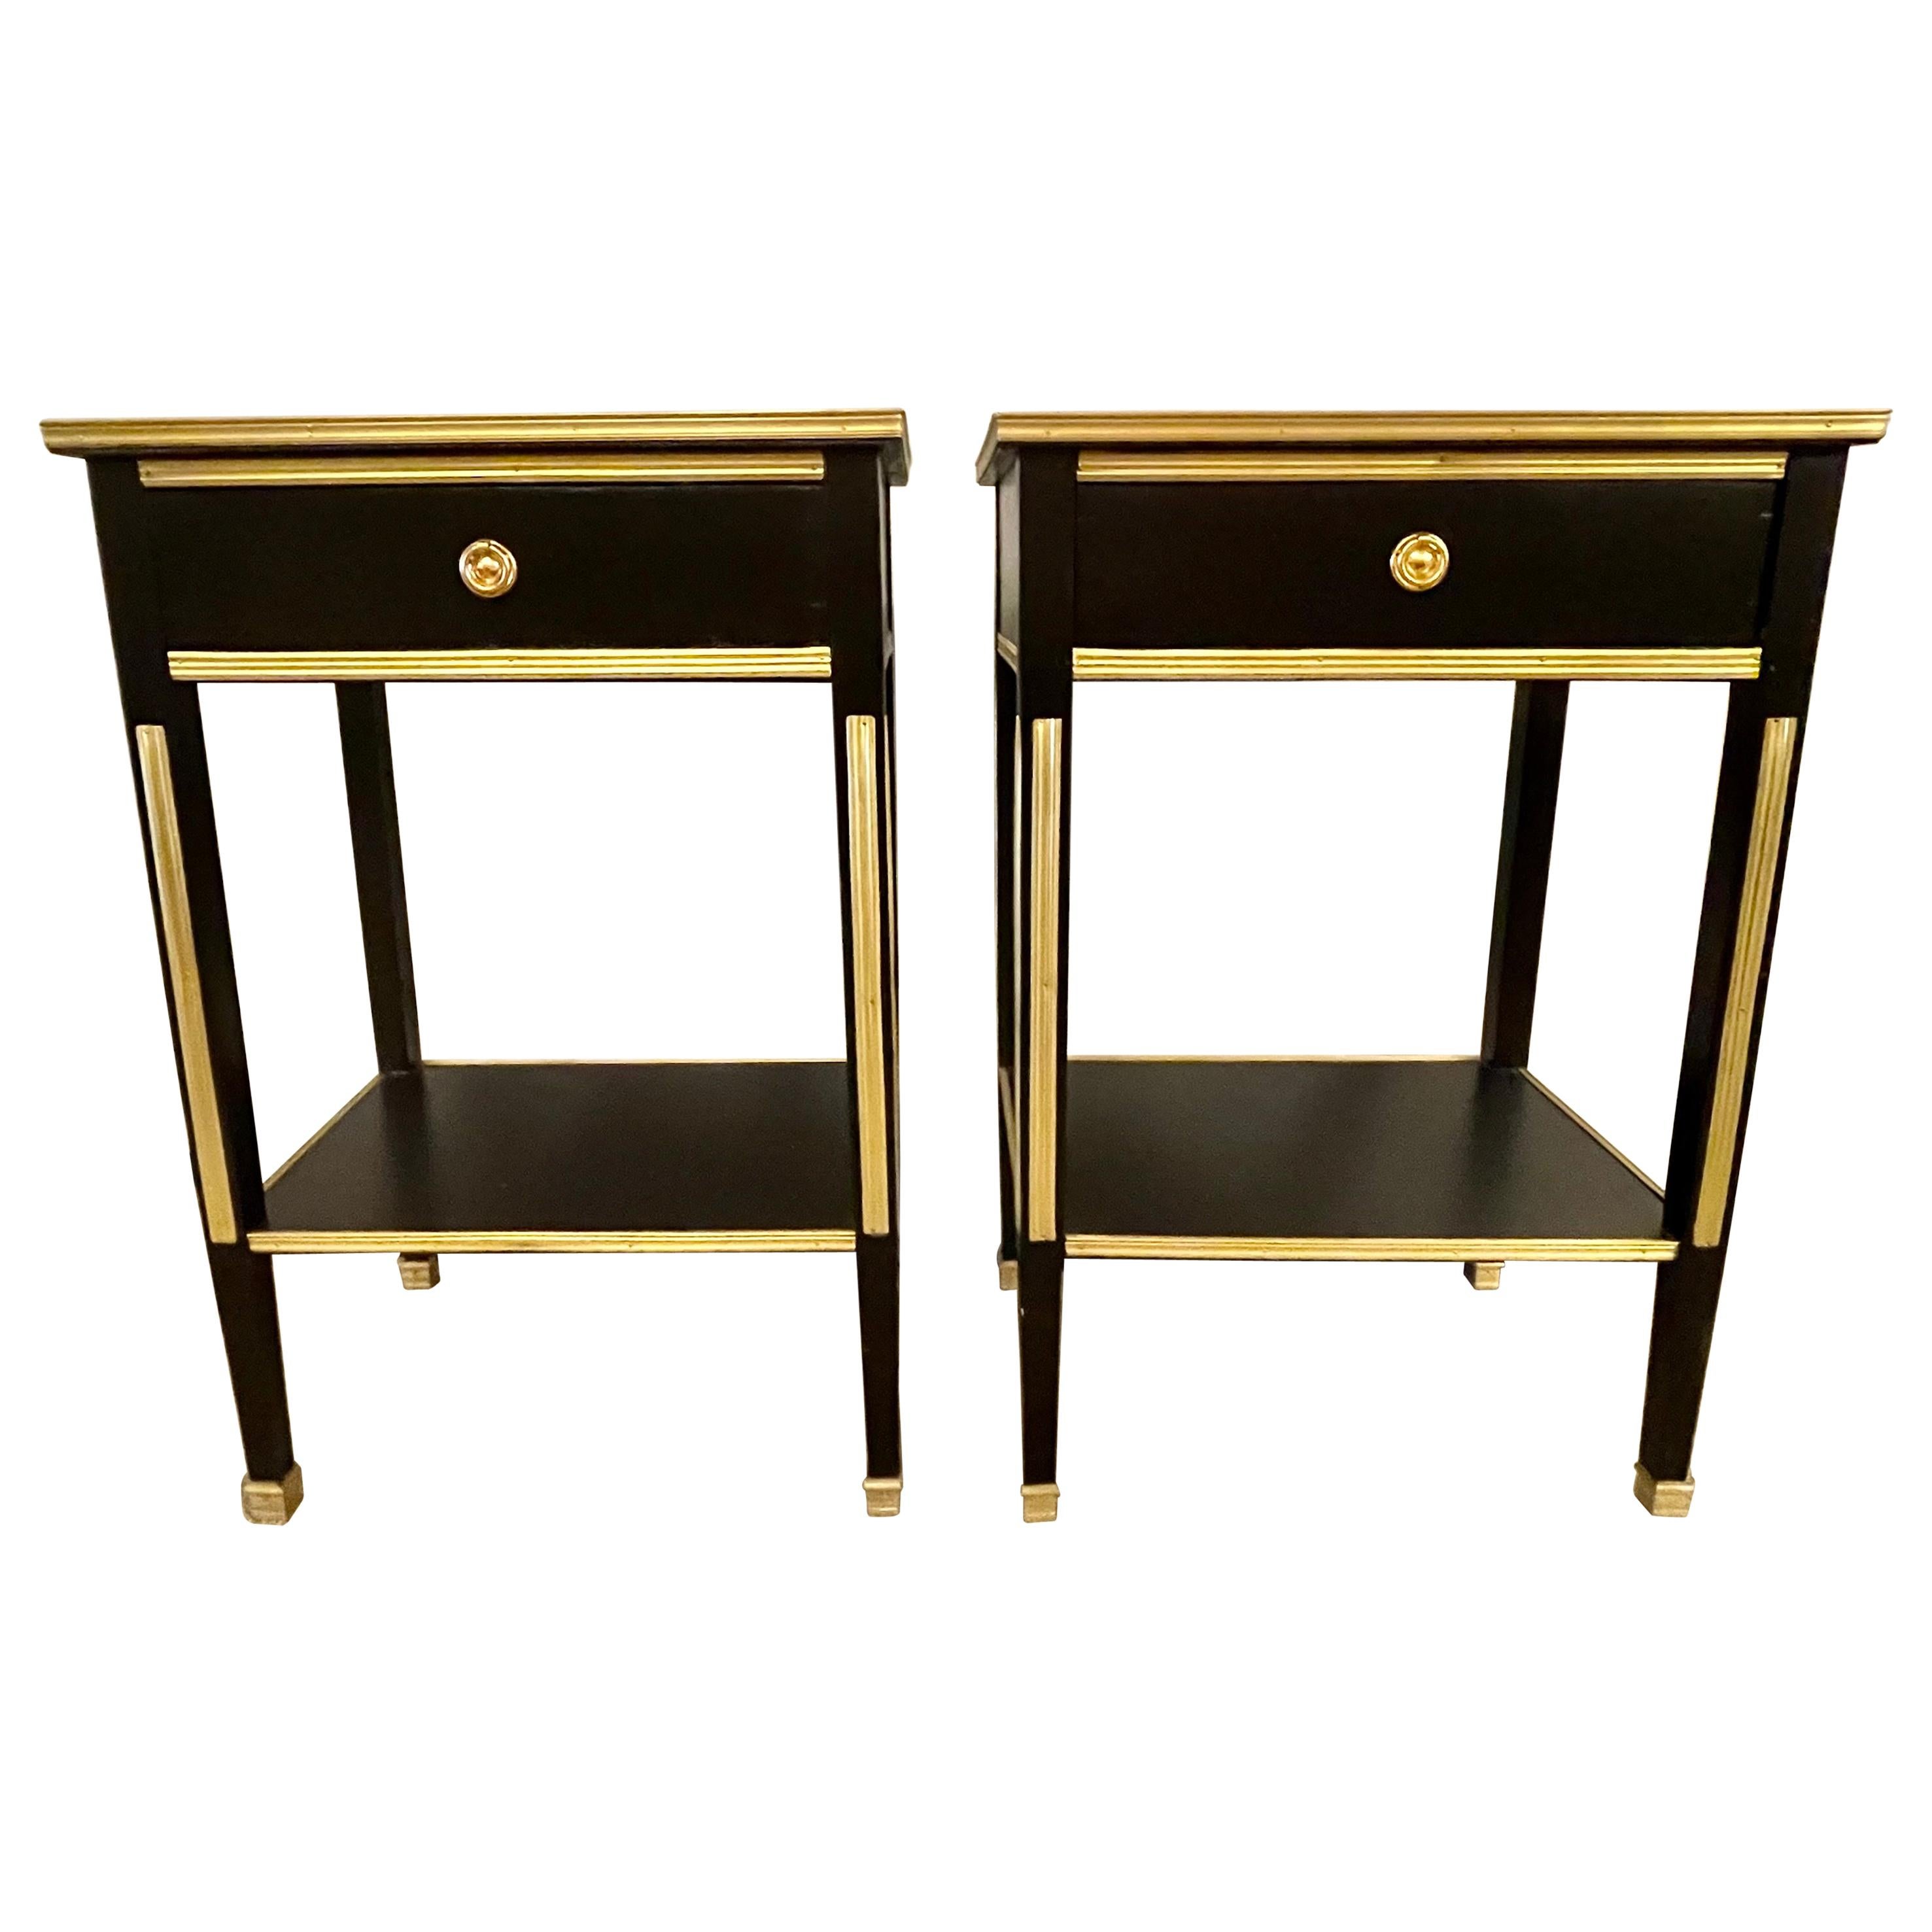 Pair of Russian Neoclassical Style Ebony Finish One Drawer Stands or End Tables